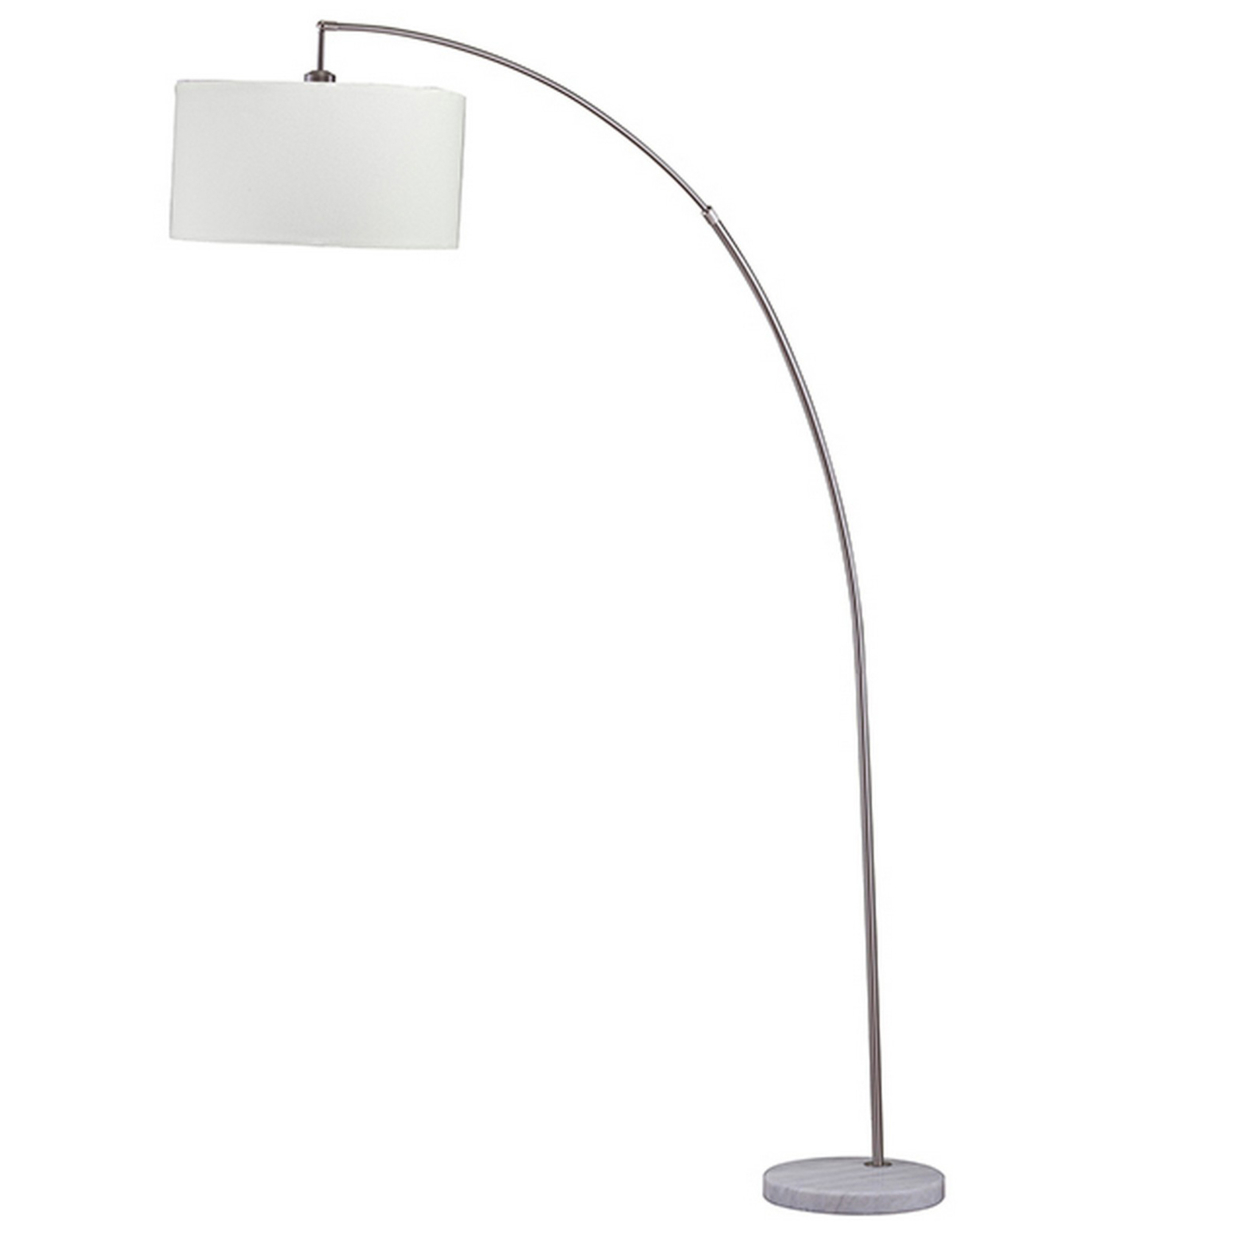 Floor Lamp With Curved Metal Frame And Drum Shade, Silver- Saltoro Sherpi